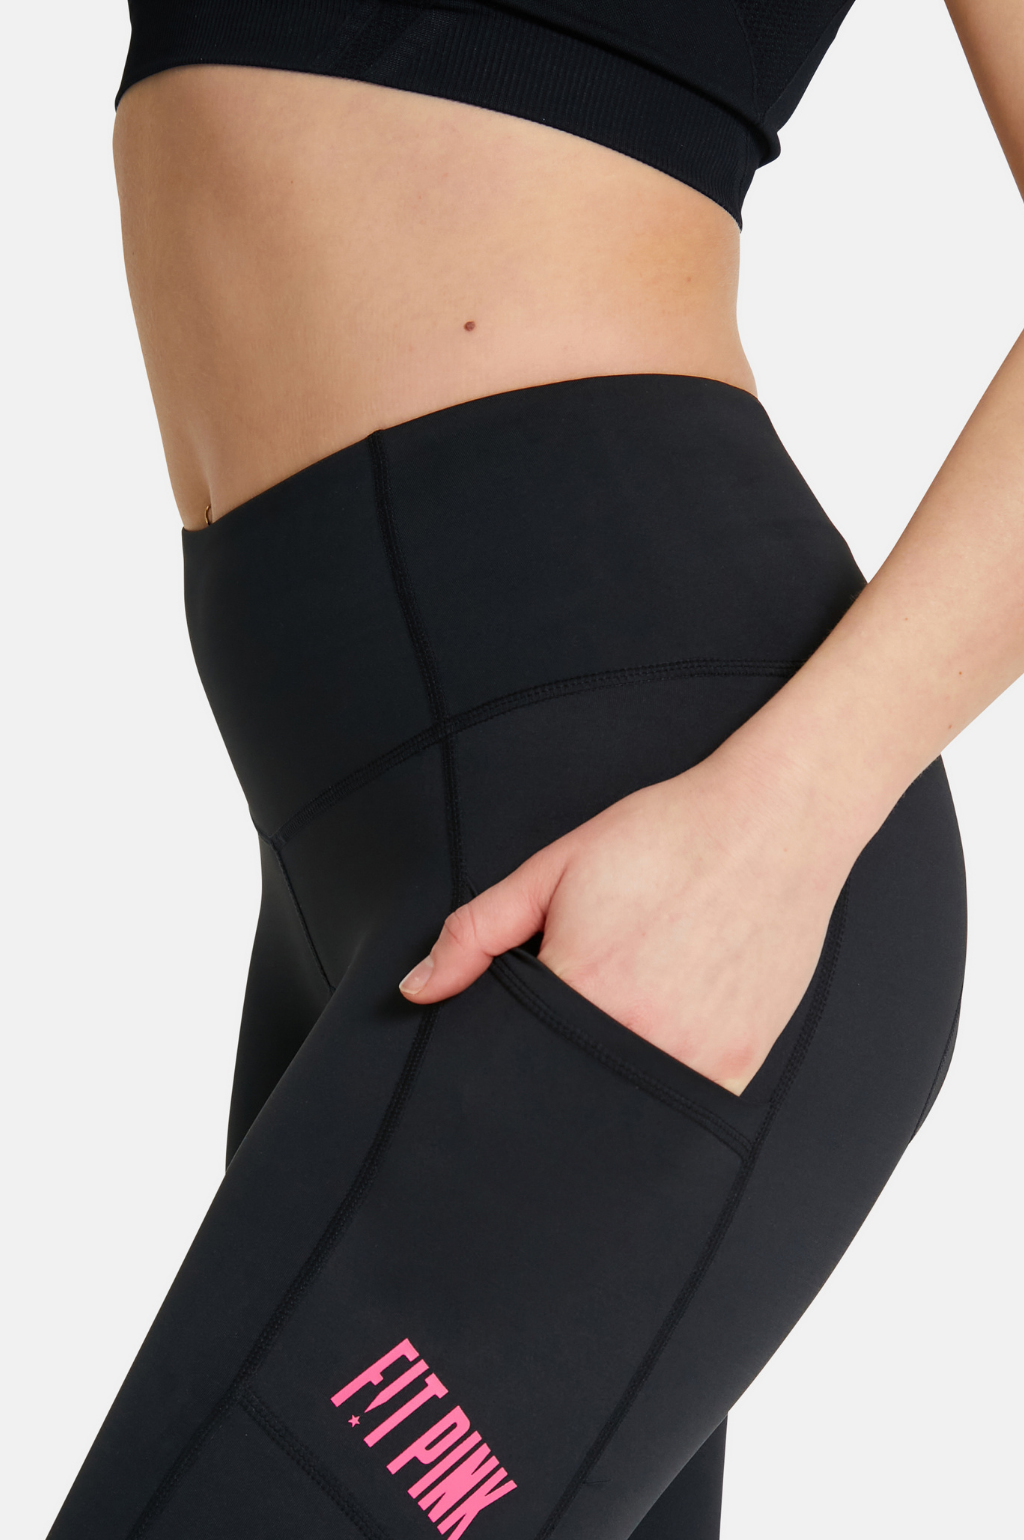 FitPink padded cycling shorts in black